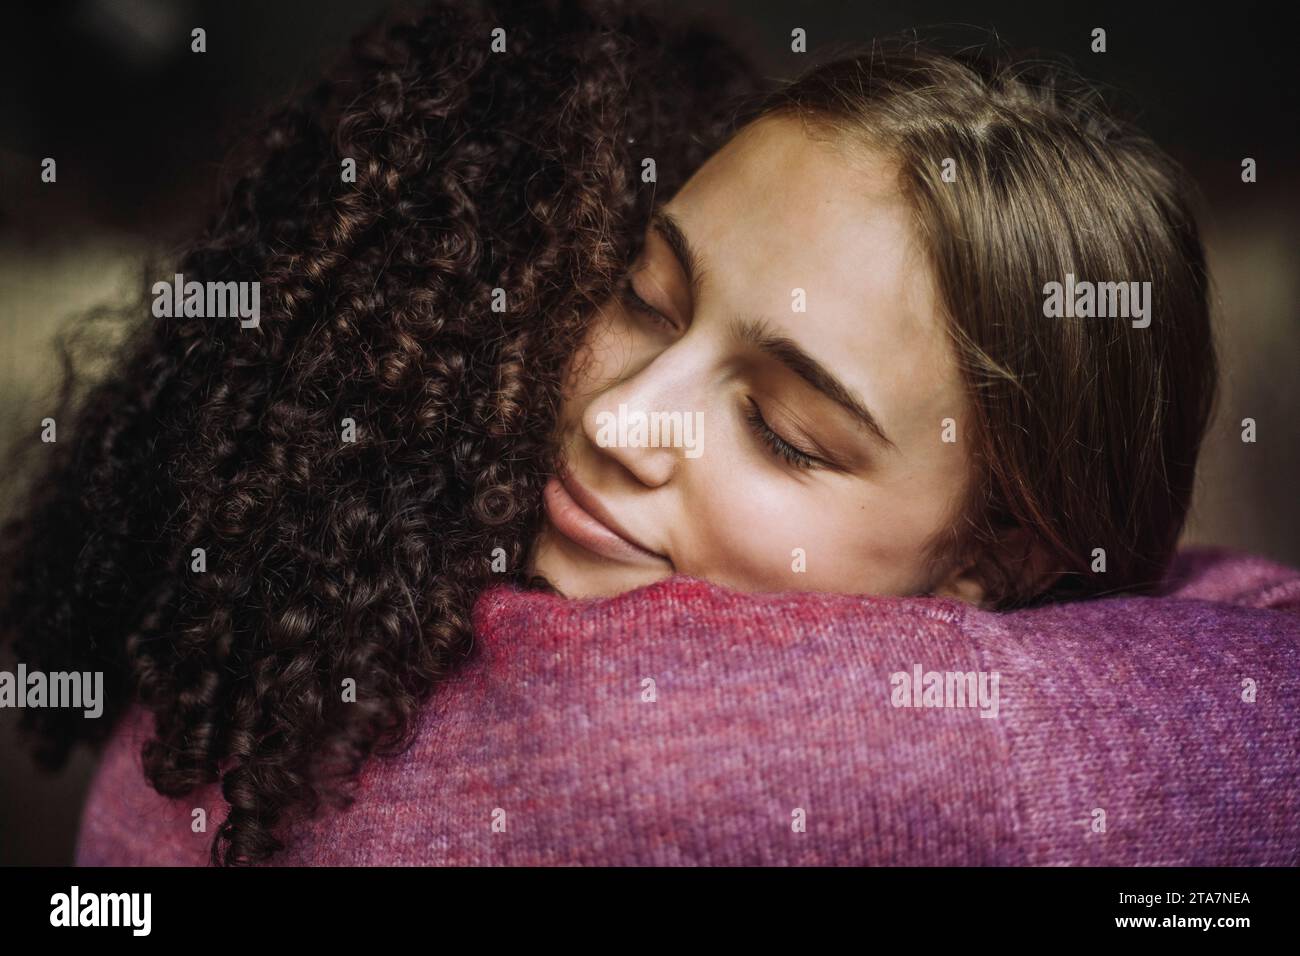 Girl embracing female friend with eyes closed Stock Photo